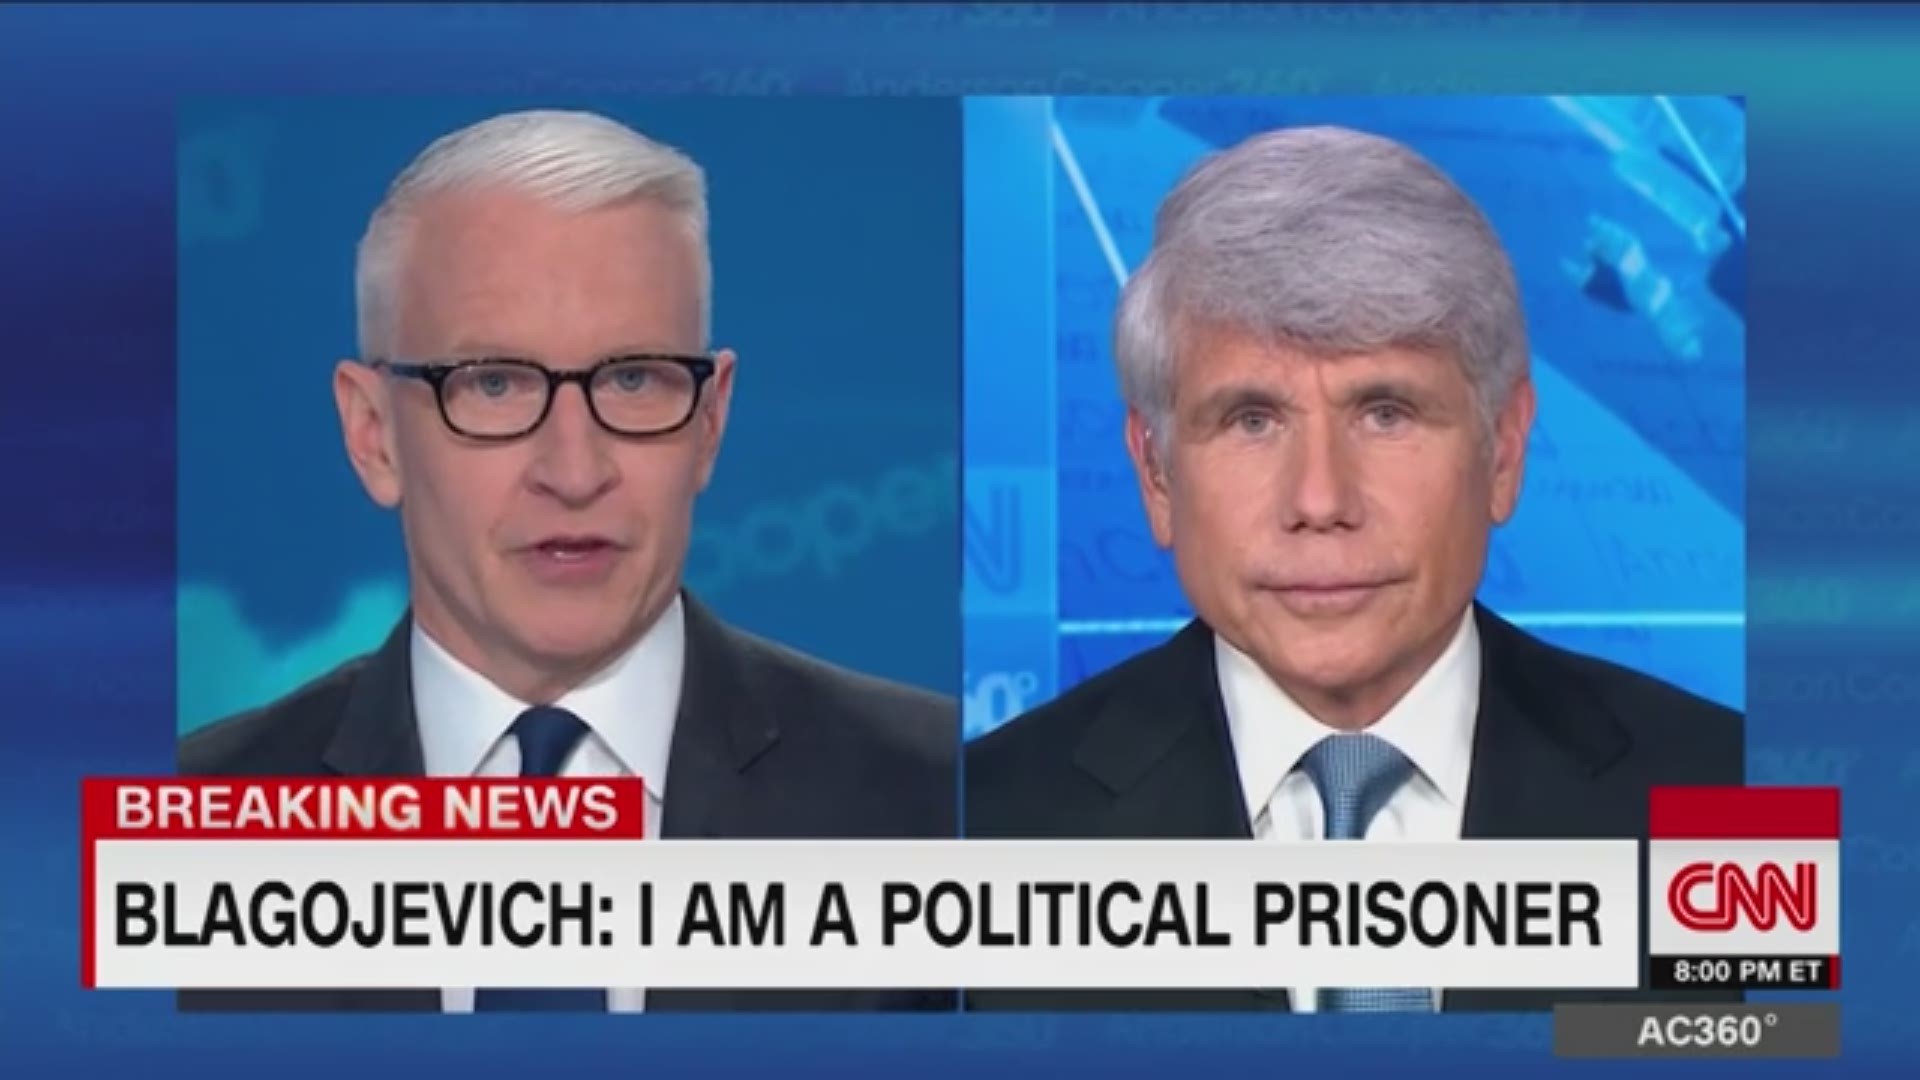 CNN's Anderson Cooper spars with former Illinois Gov. Rod Blagojevich, who calls himself a "political prisoner" days after being
pardoned by President Trump.